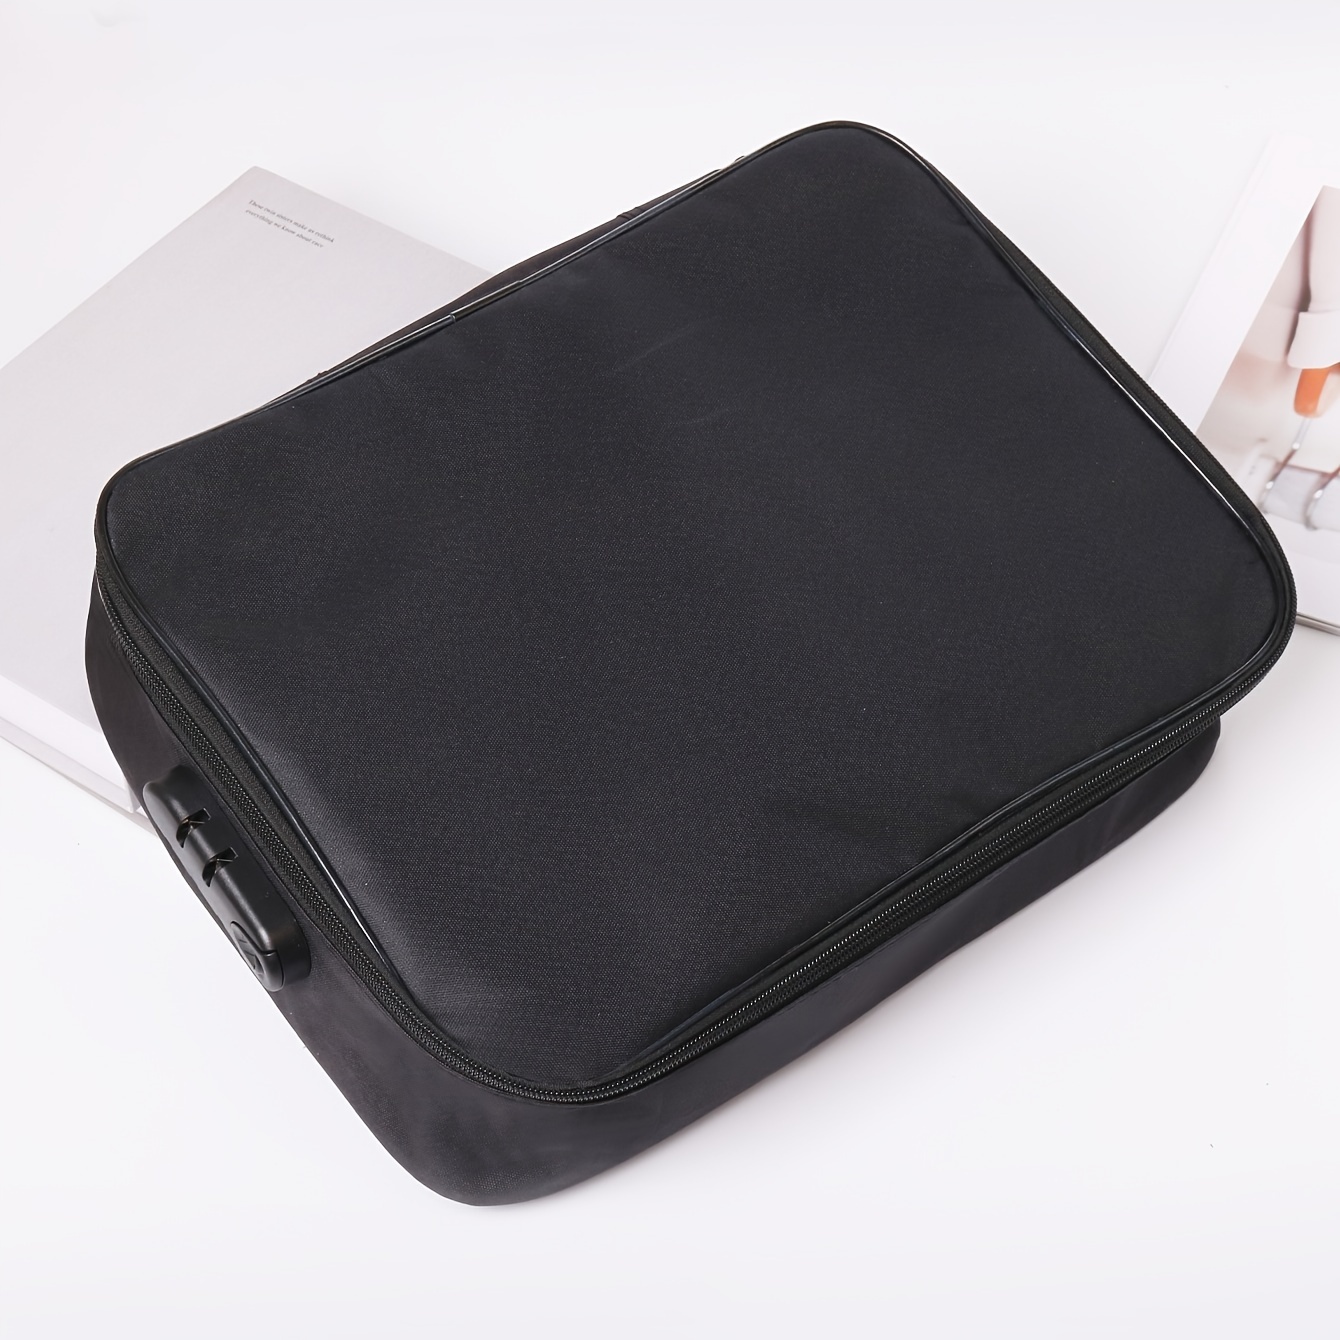 

1/2pcs File Organizer Bag, Certificate Storage Box, Home Office Bag, Portable With Combination Lock, Waterproof Multi-layer Portable File Storage Bag, Drawer Storage And Sorting Bag